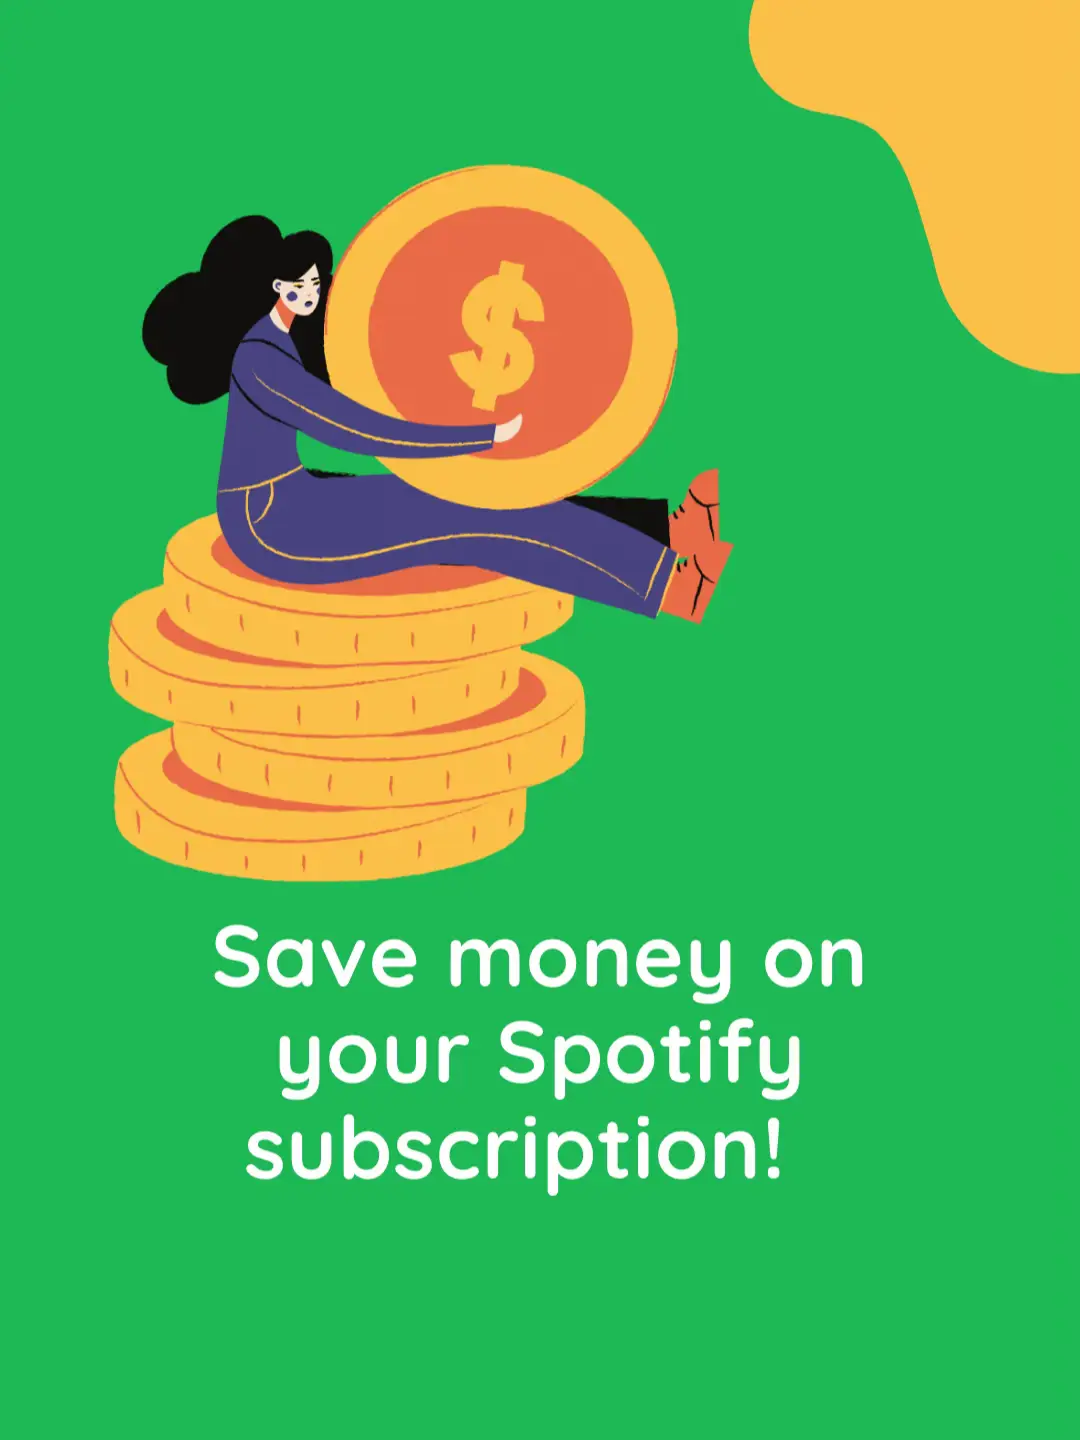 Spotify 1 month Premium subscription Gift card worth $9.90